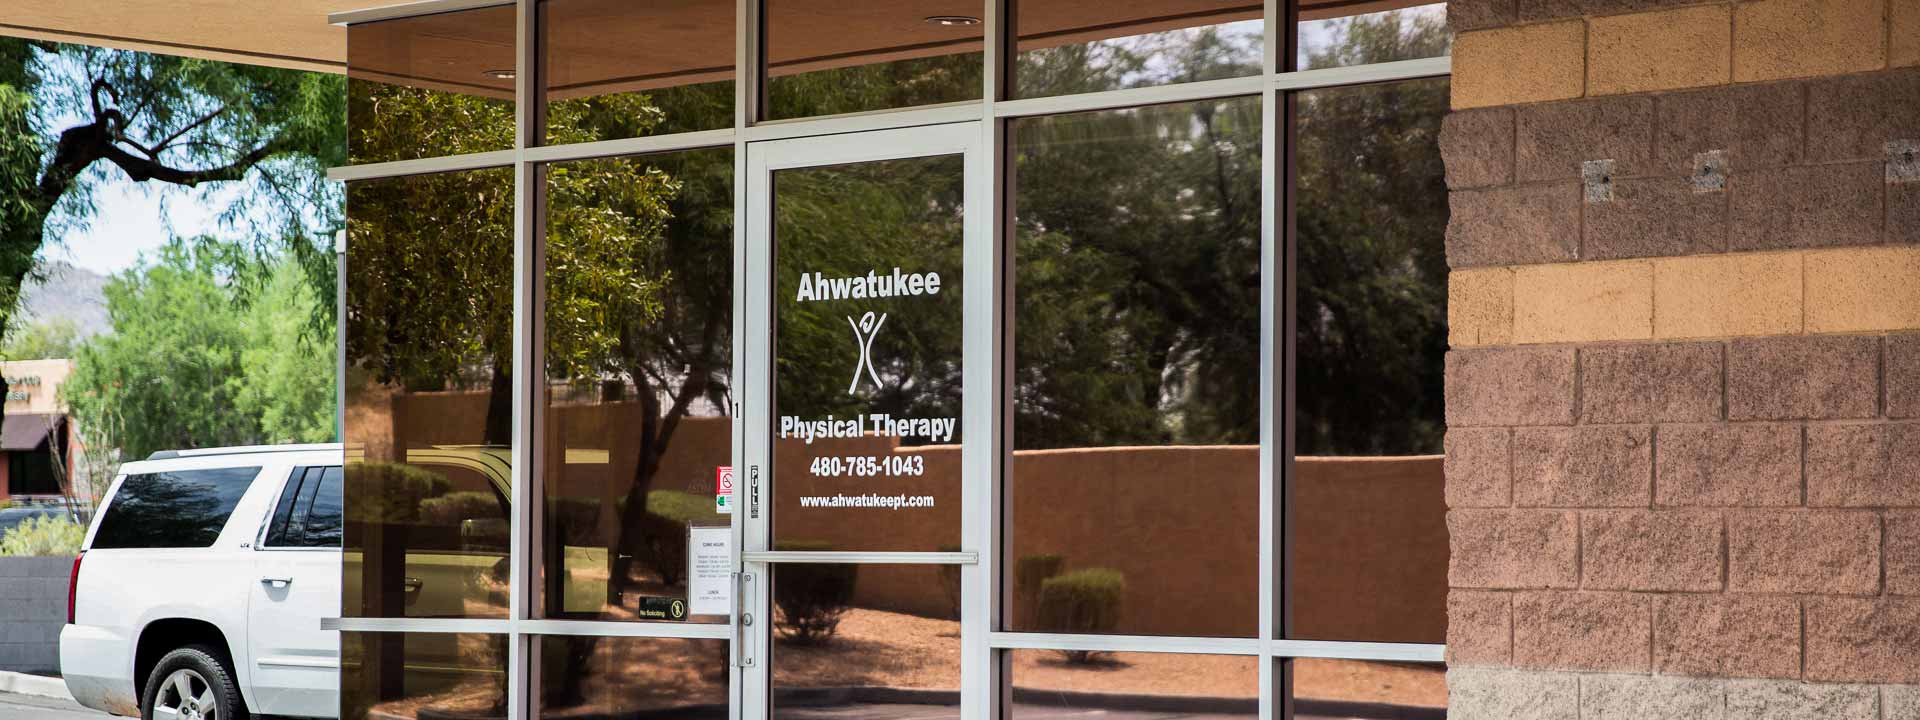 Ahwatukee Physical Therapy